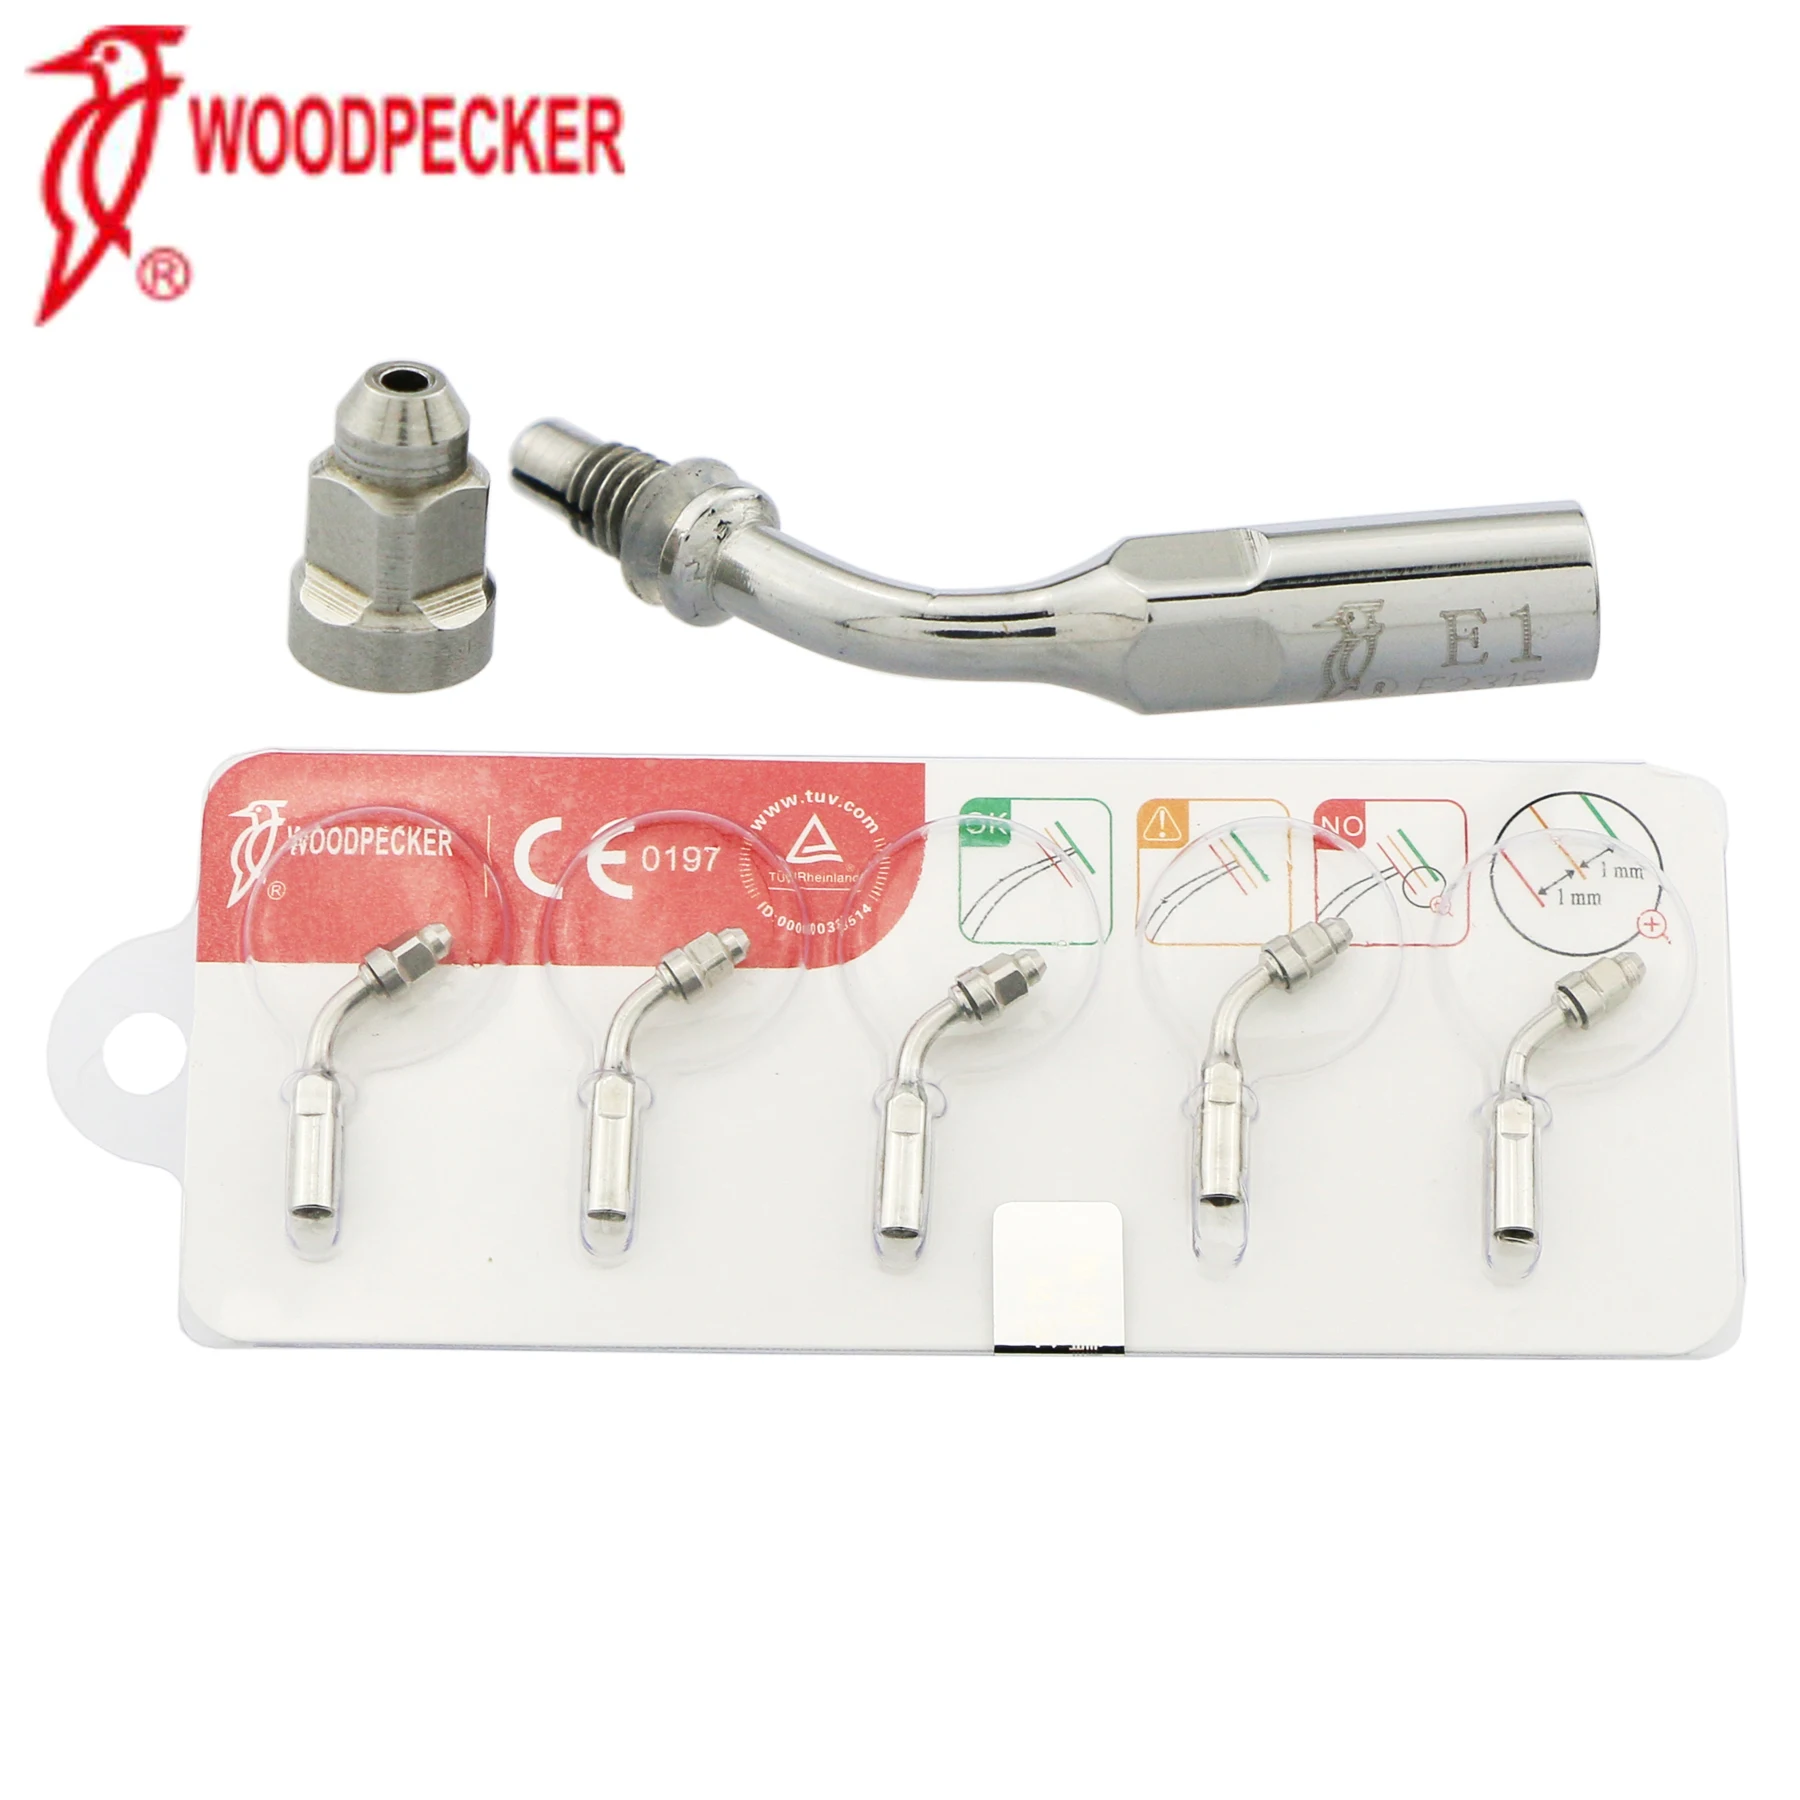 

5Pcs Woodpecker Dental 120° Holder Root Canal Cleaning Irrigating Ultrasonic Scaler Endodontics Preparation Tips E1 Fit UDS EMS